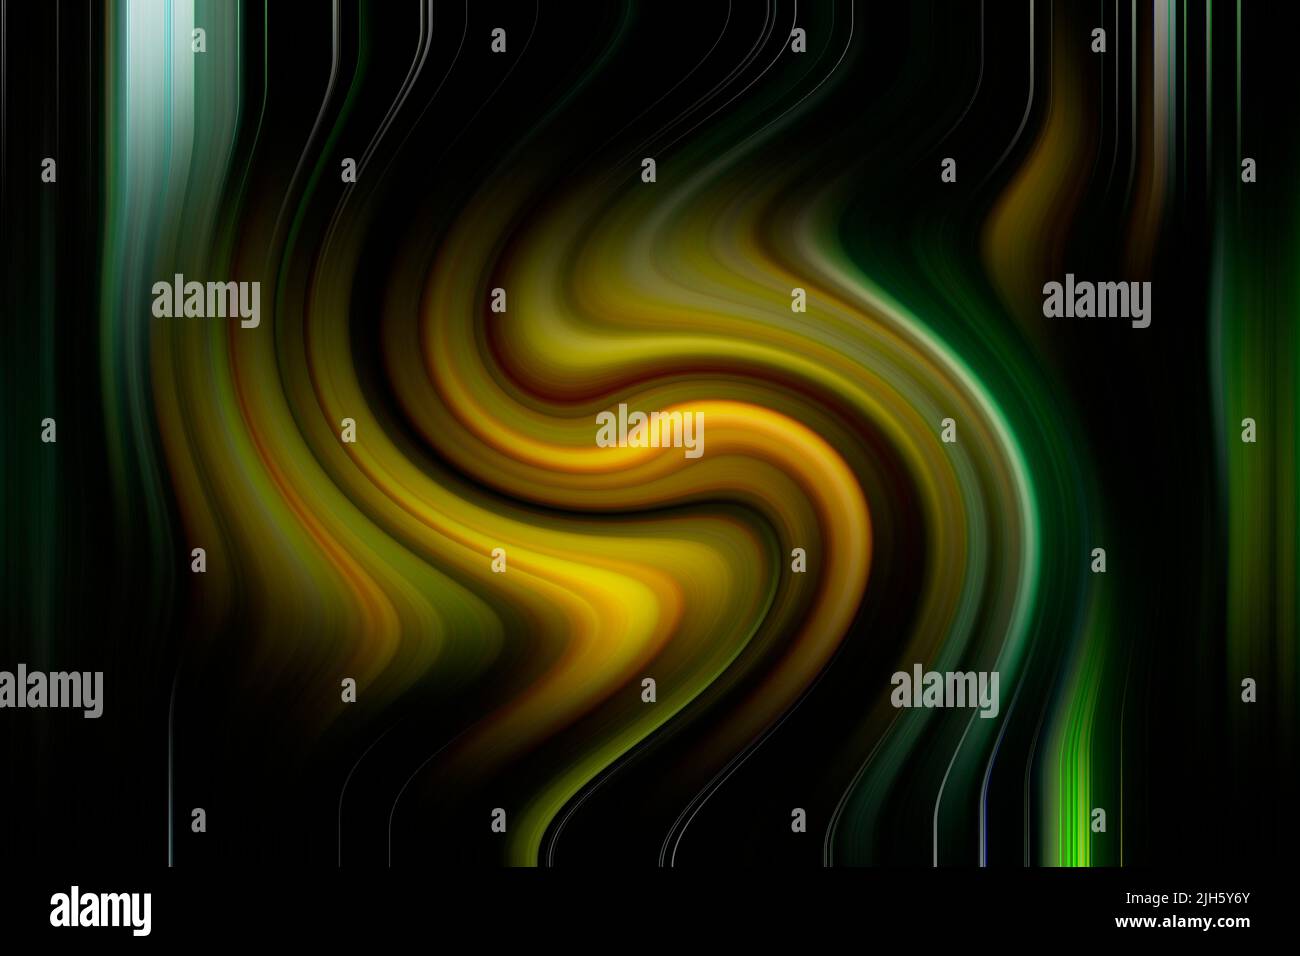 abstract digital background illustration with colorful lines Stock Photo